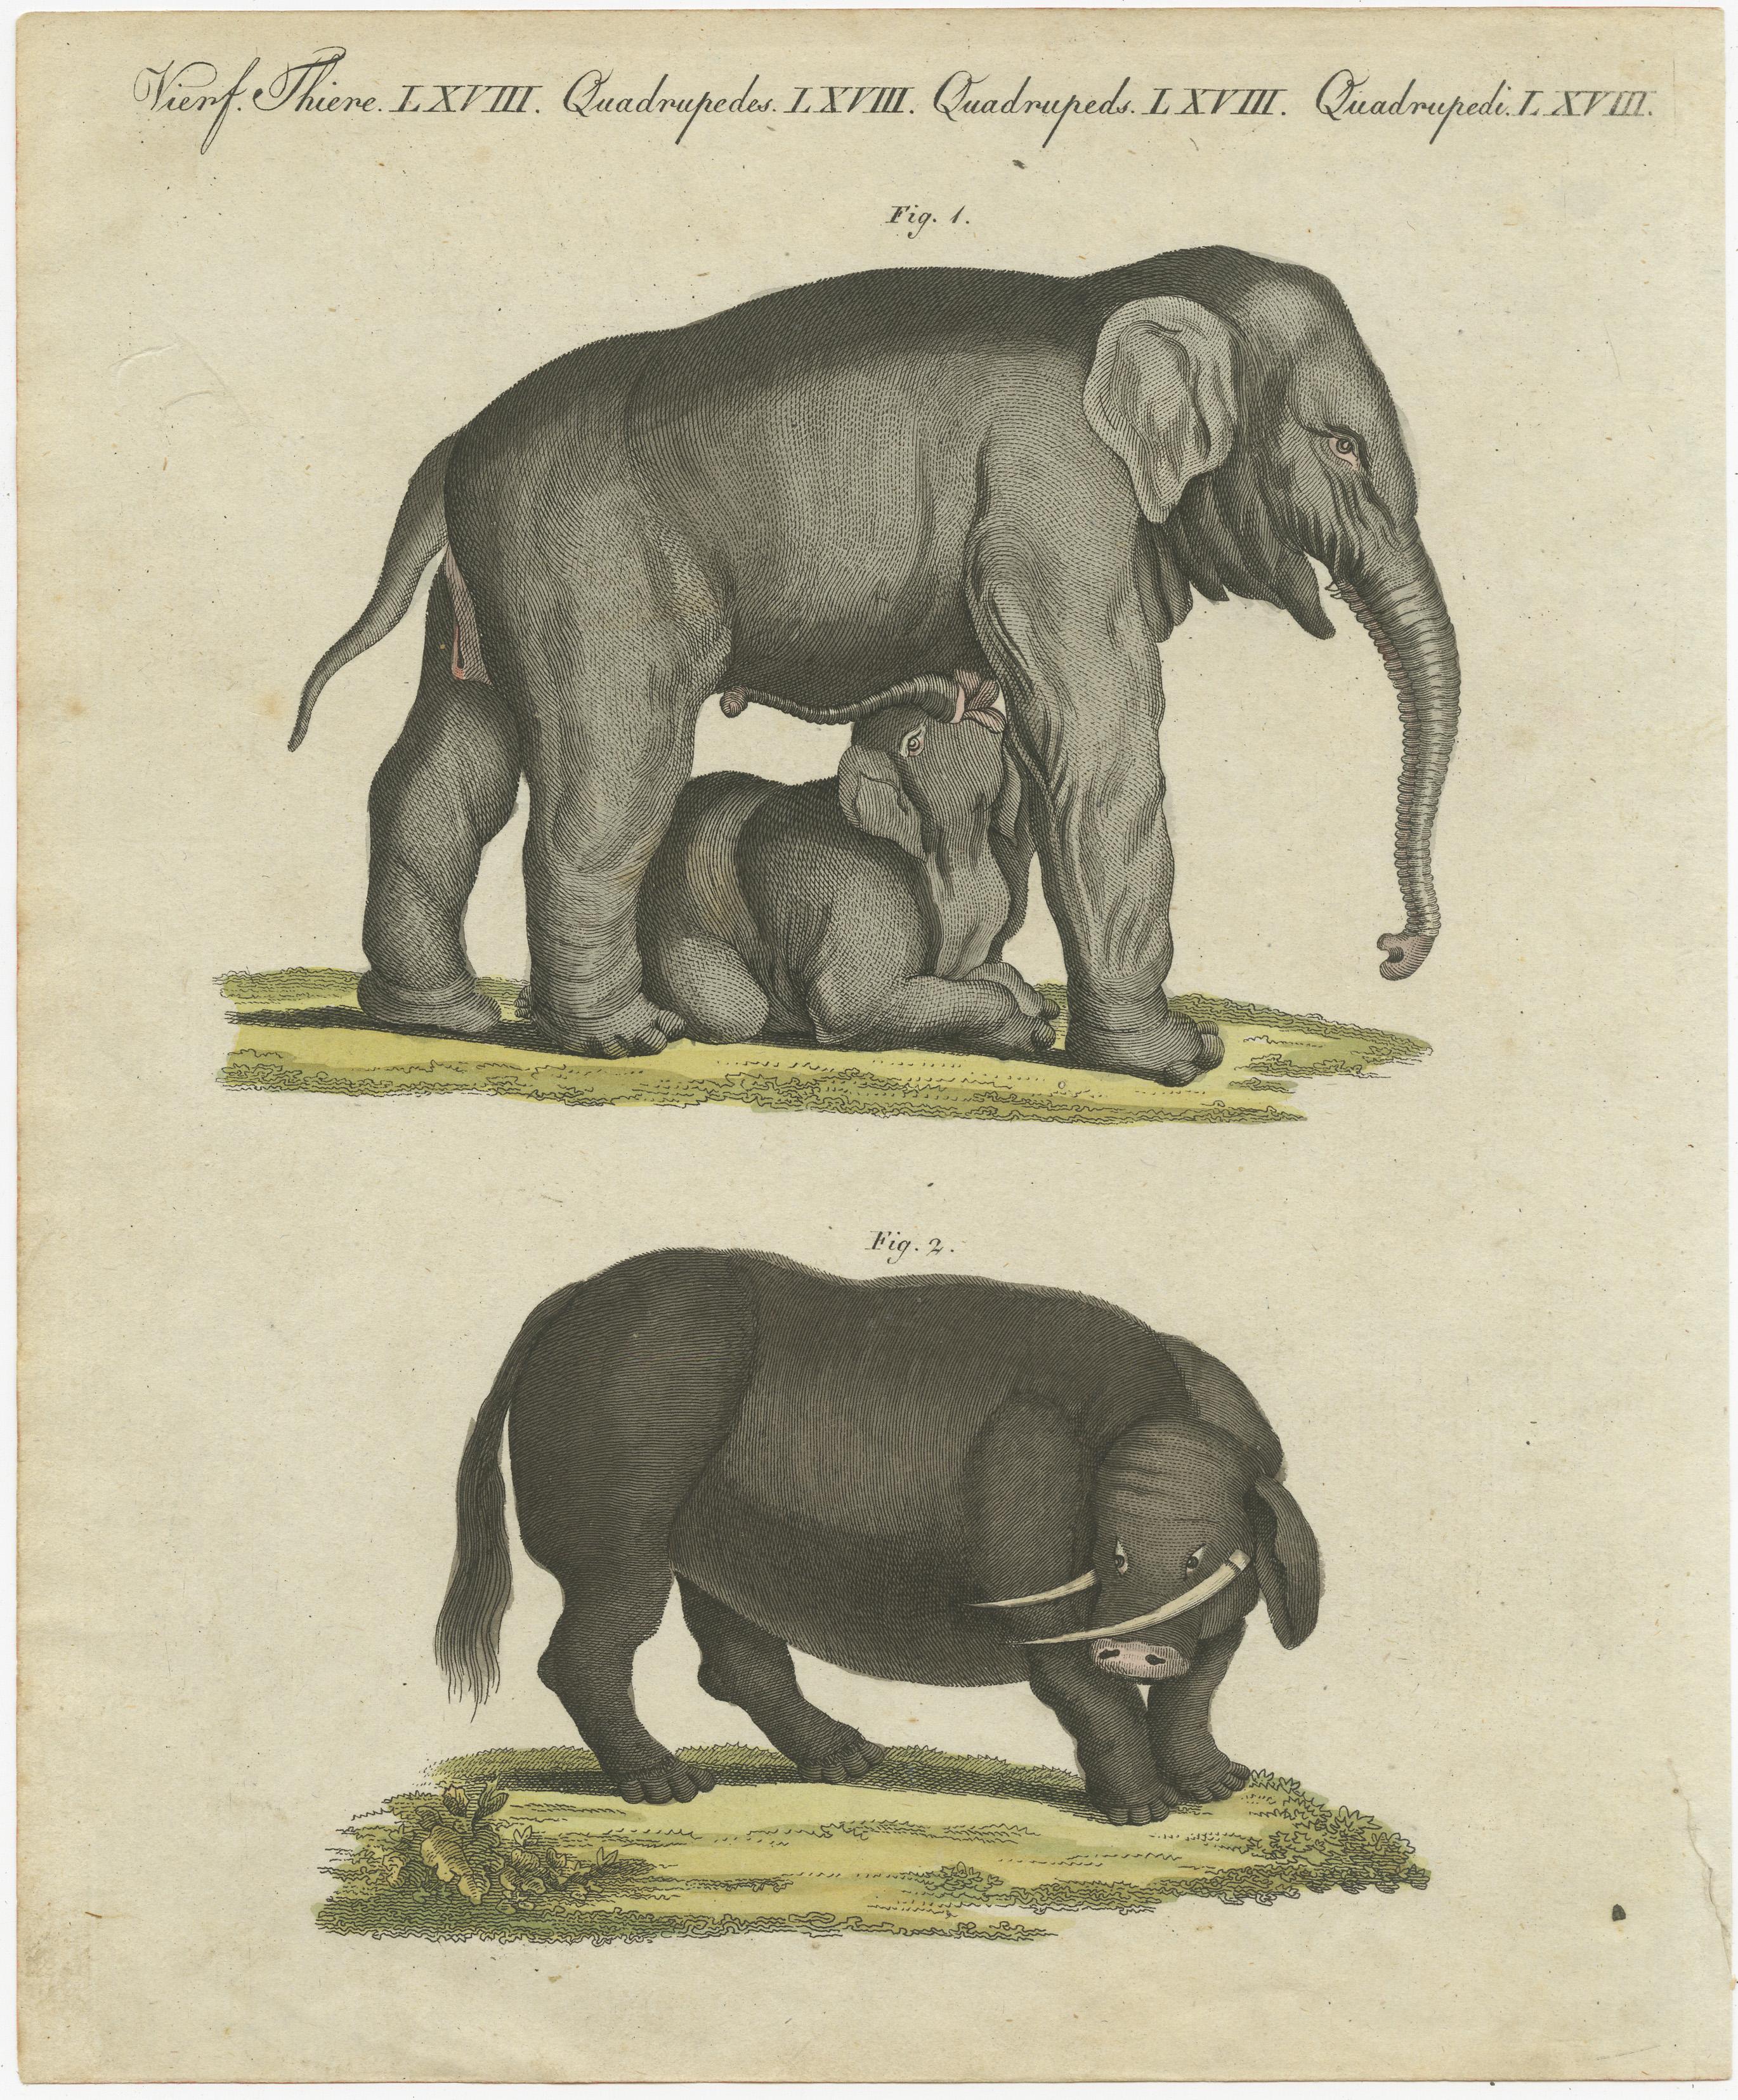 This original antique print shows the endangered Indian elephant, Elephas maximus indicus, female suckling her young, 1, and mythical beast sukotyro. 

Originates from Bertuch's 'Bilderbuch für Kinder'. In 1790 Friedrich Justin Bertuch started his